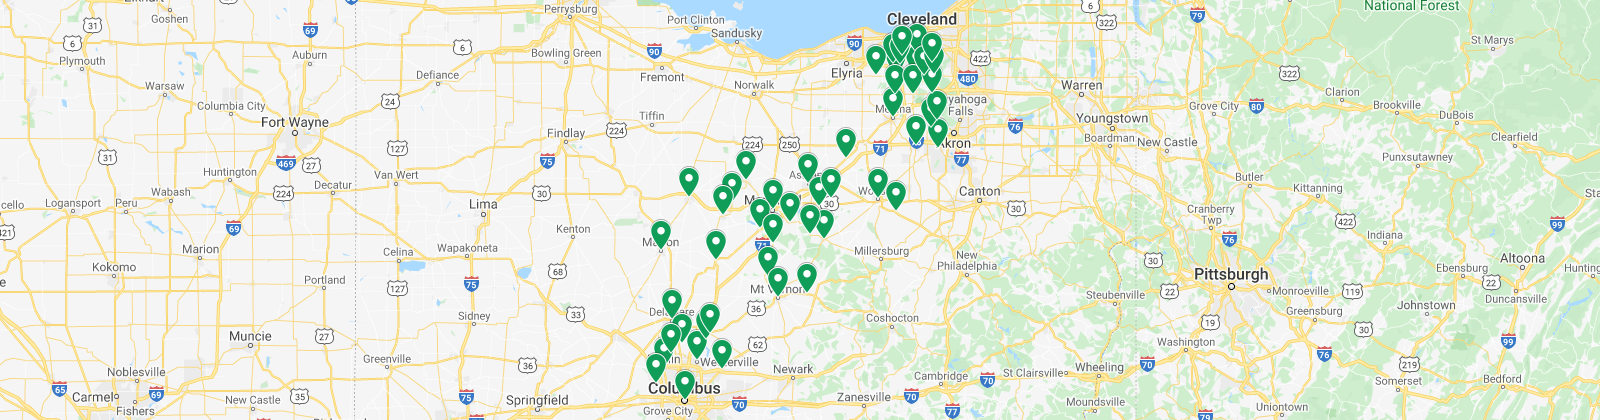 Free Spray Lawn Care service areas map graphic